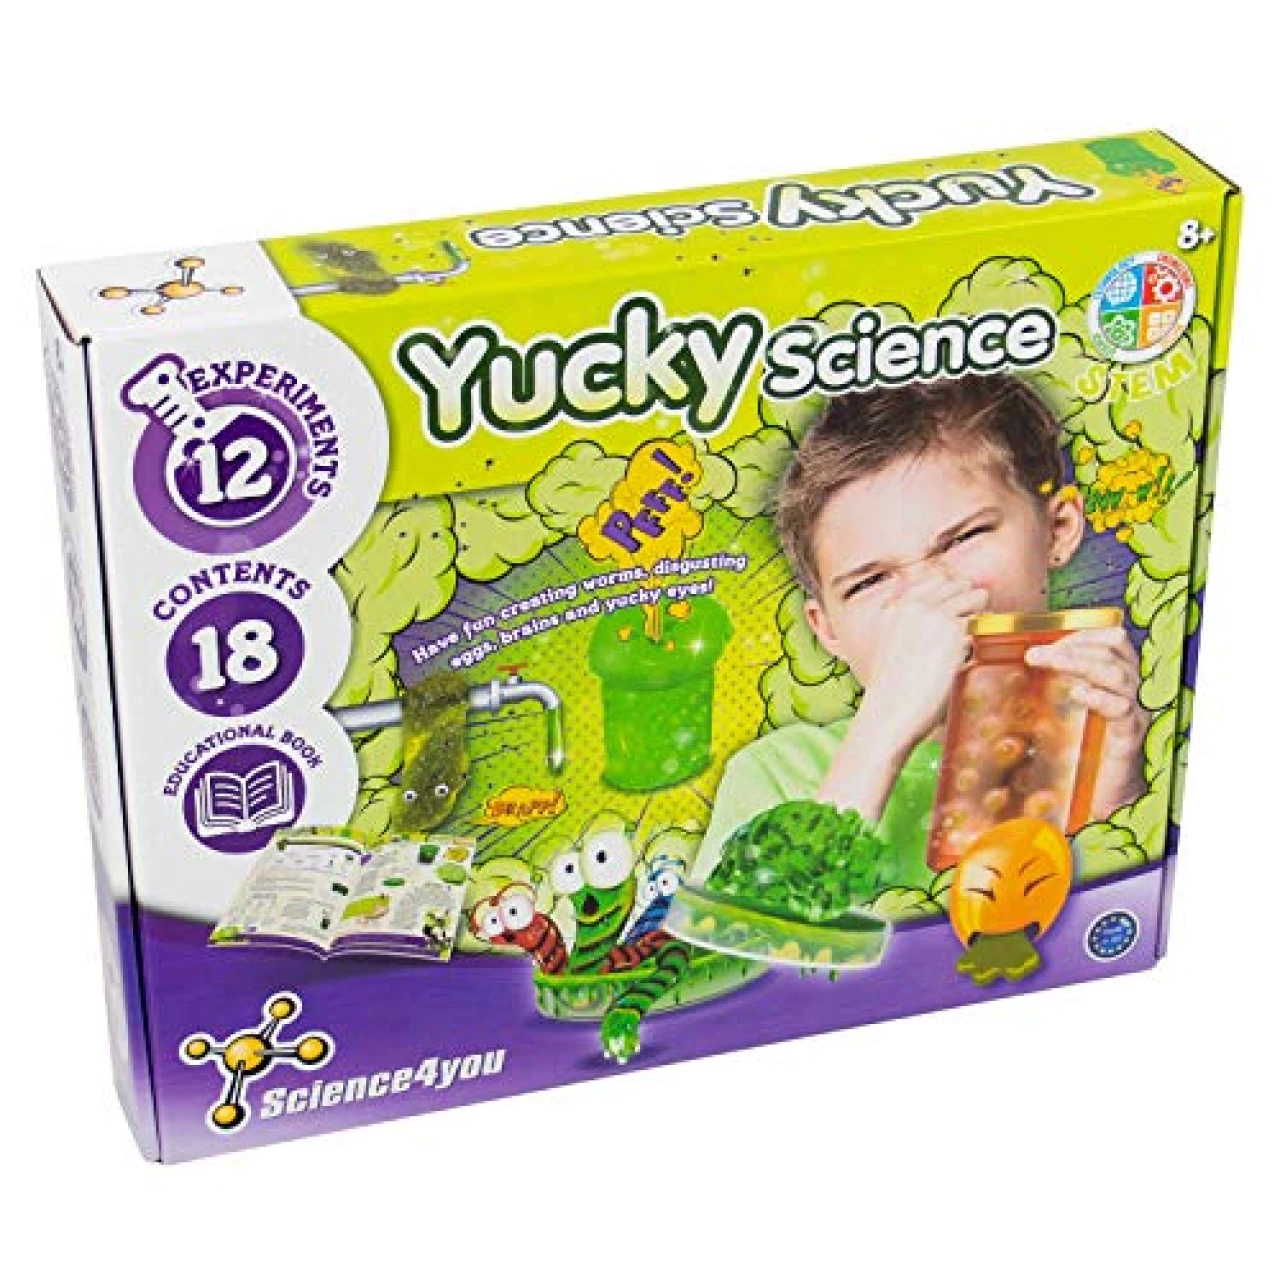 Science 4 You - DOM Yucky Science, Childrens STEM Educational Science kit for Kids Aged 8+, Multi-Colour